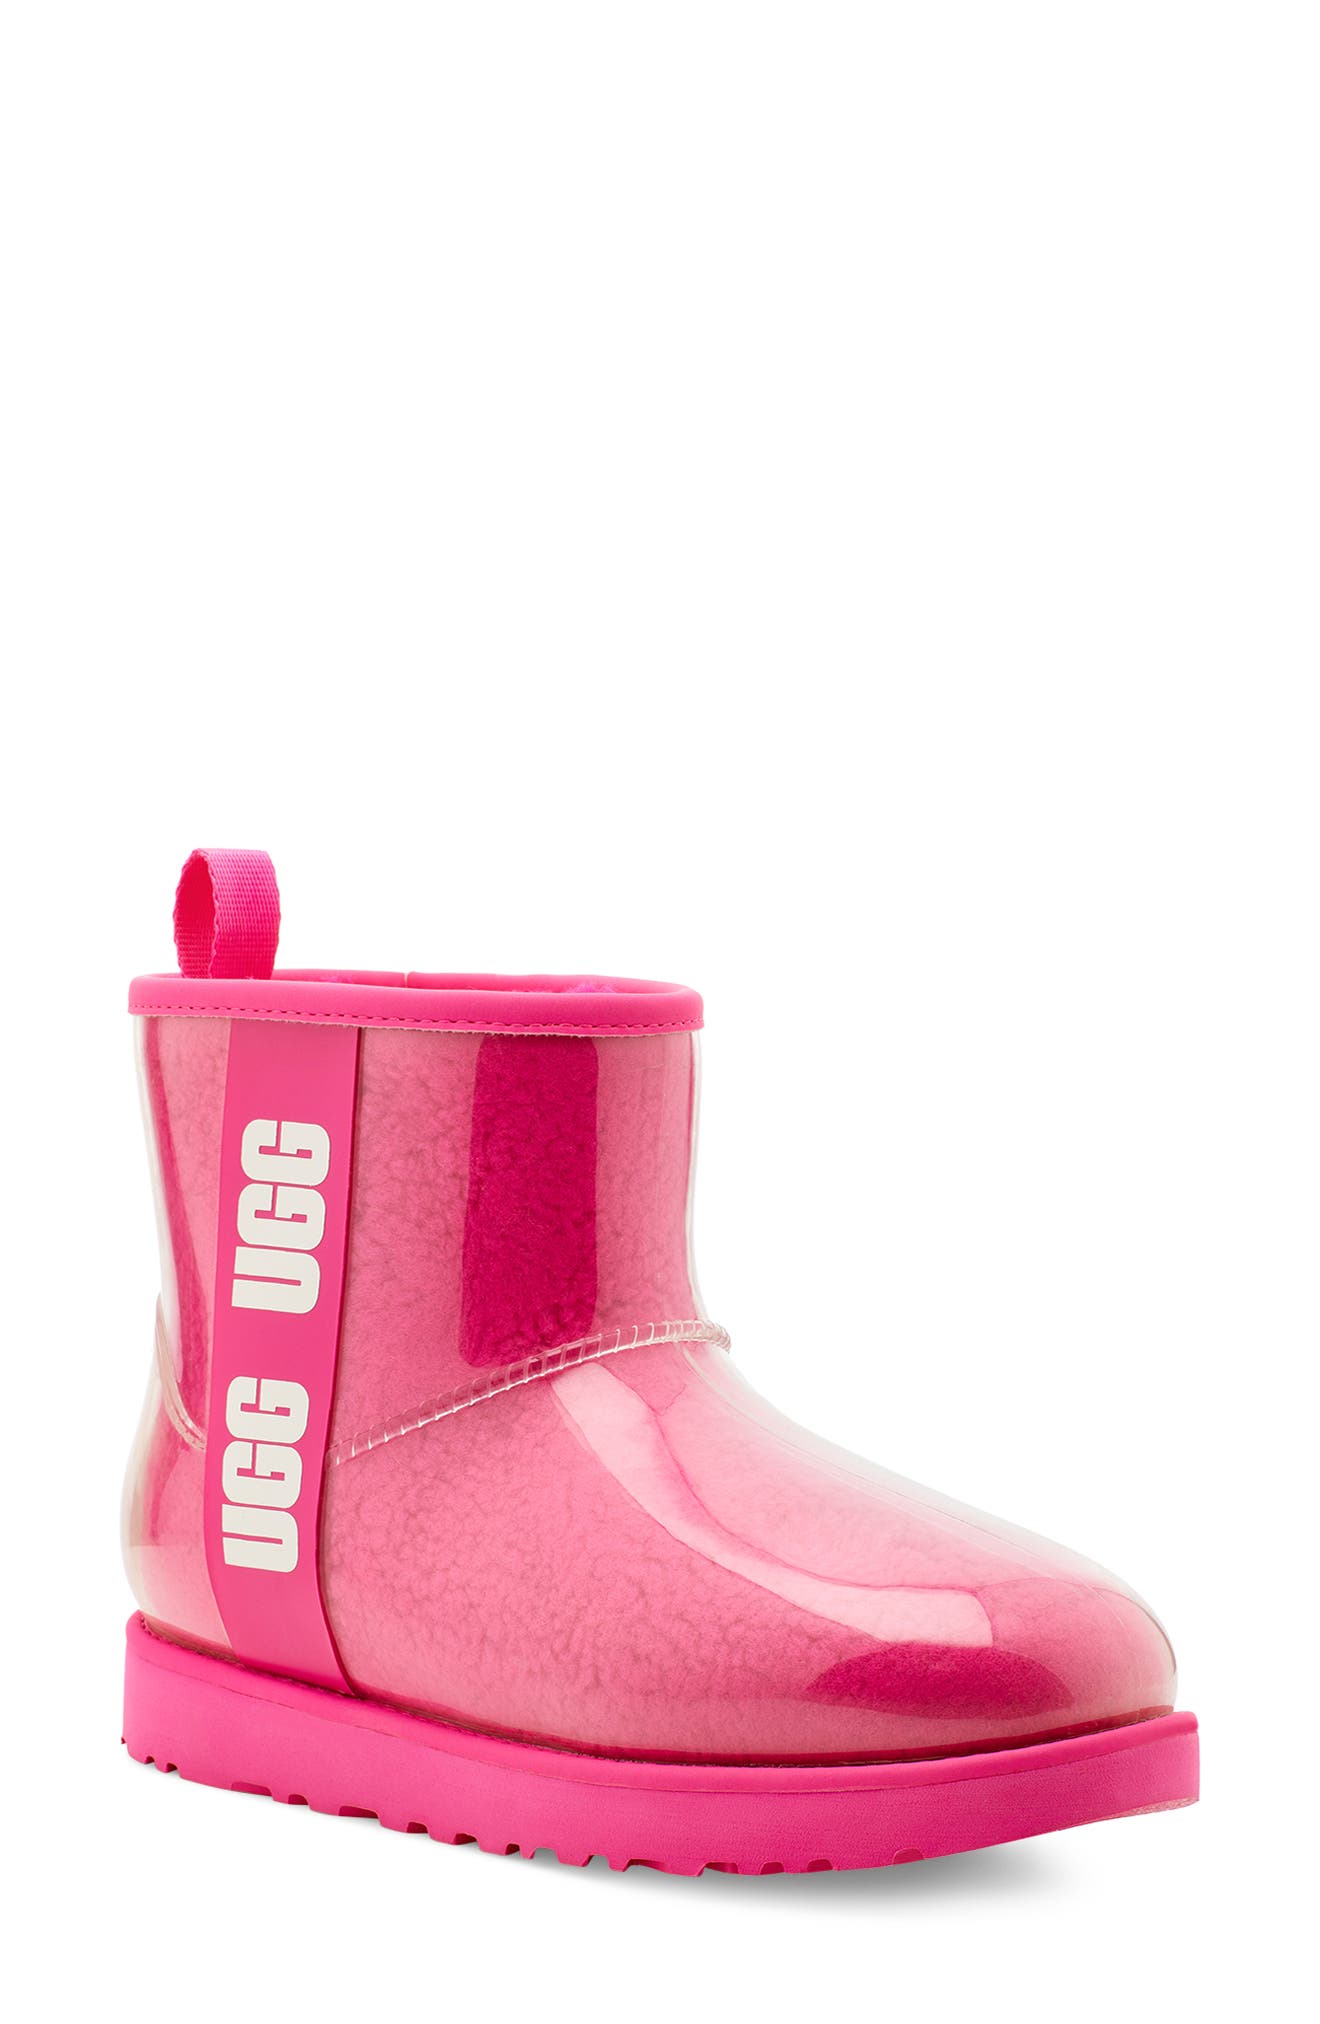 women's clothing ugg boots